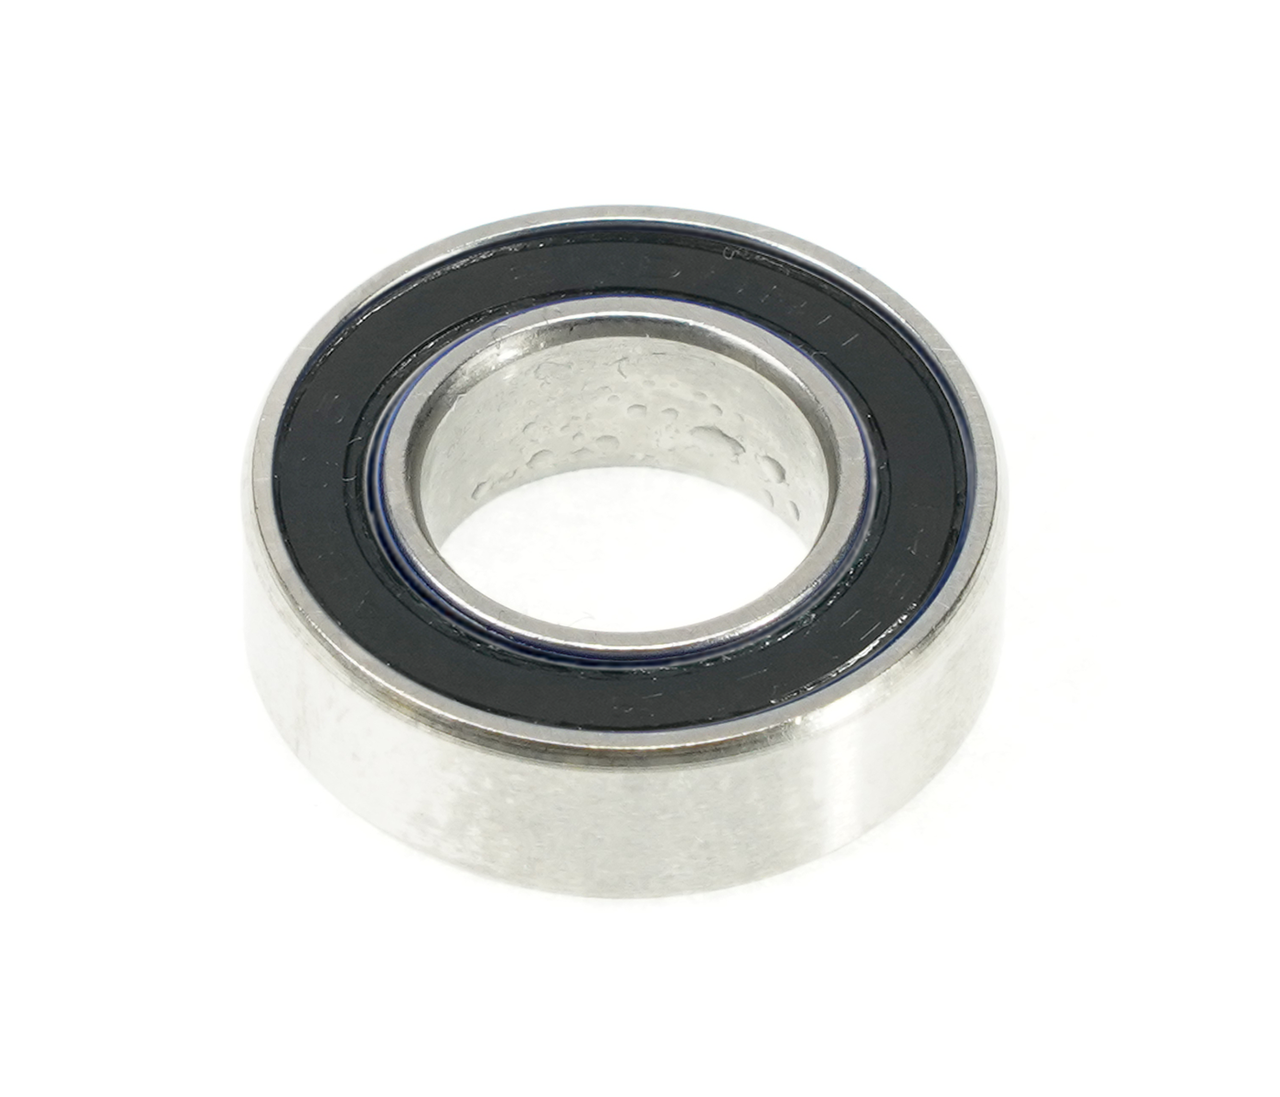 Enduro S689 VV - Stainless Steel, Radial Bearing (C3 Clearance) - 9mm x 17mm x 5mm